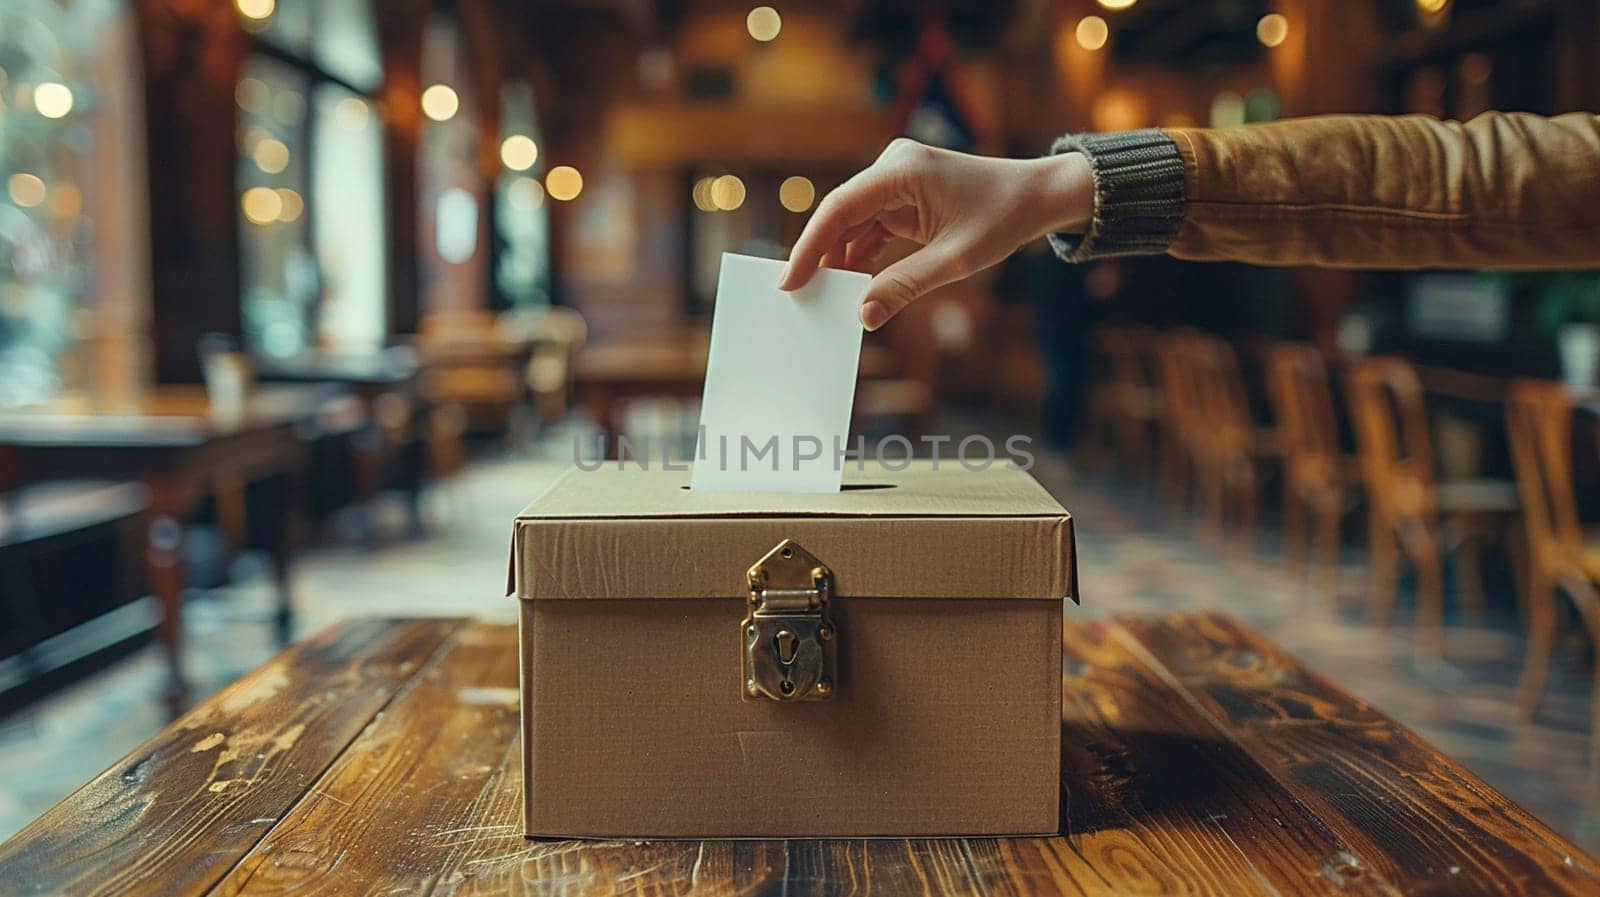 Close-up of a hand casting a vote in a ballot box, symbolizing democracy and civic duty.